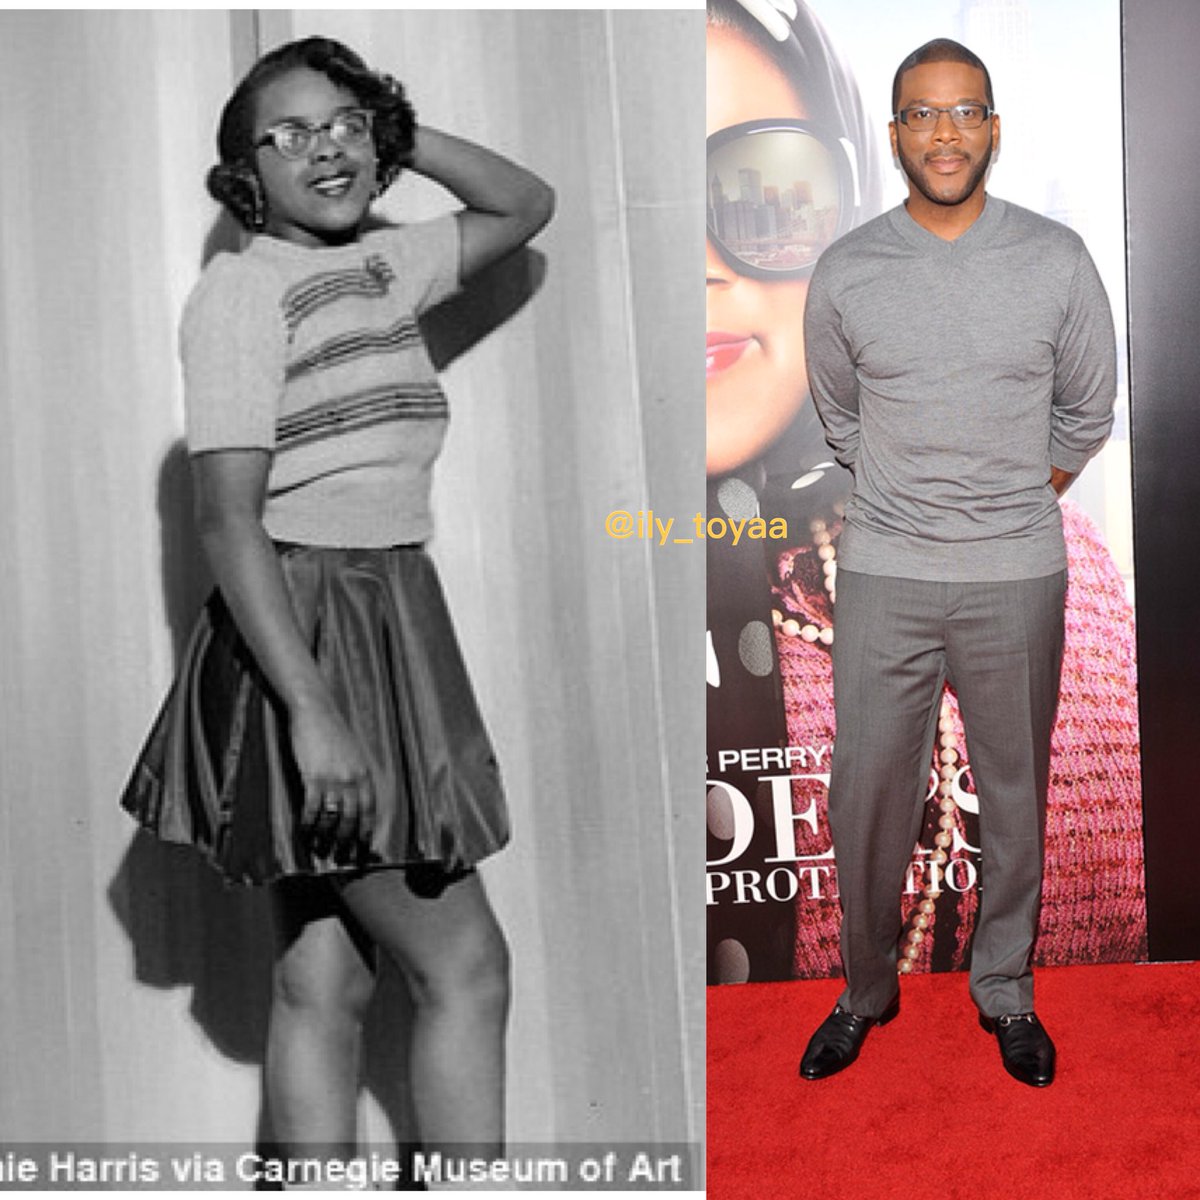 1957 Vs 2012 South African Woman VS Tyler Perry (Madea )  @tylerperry